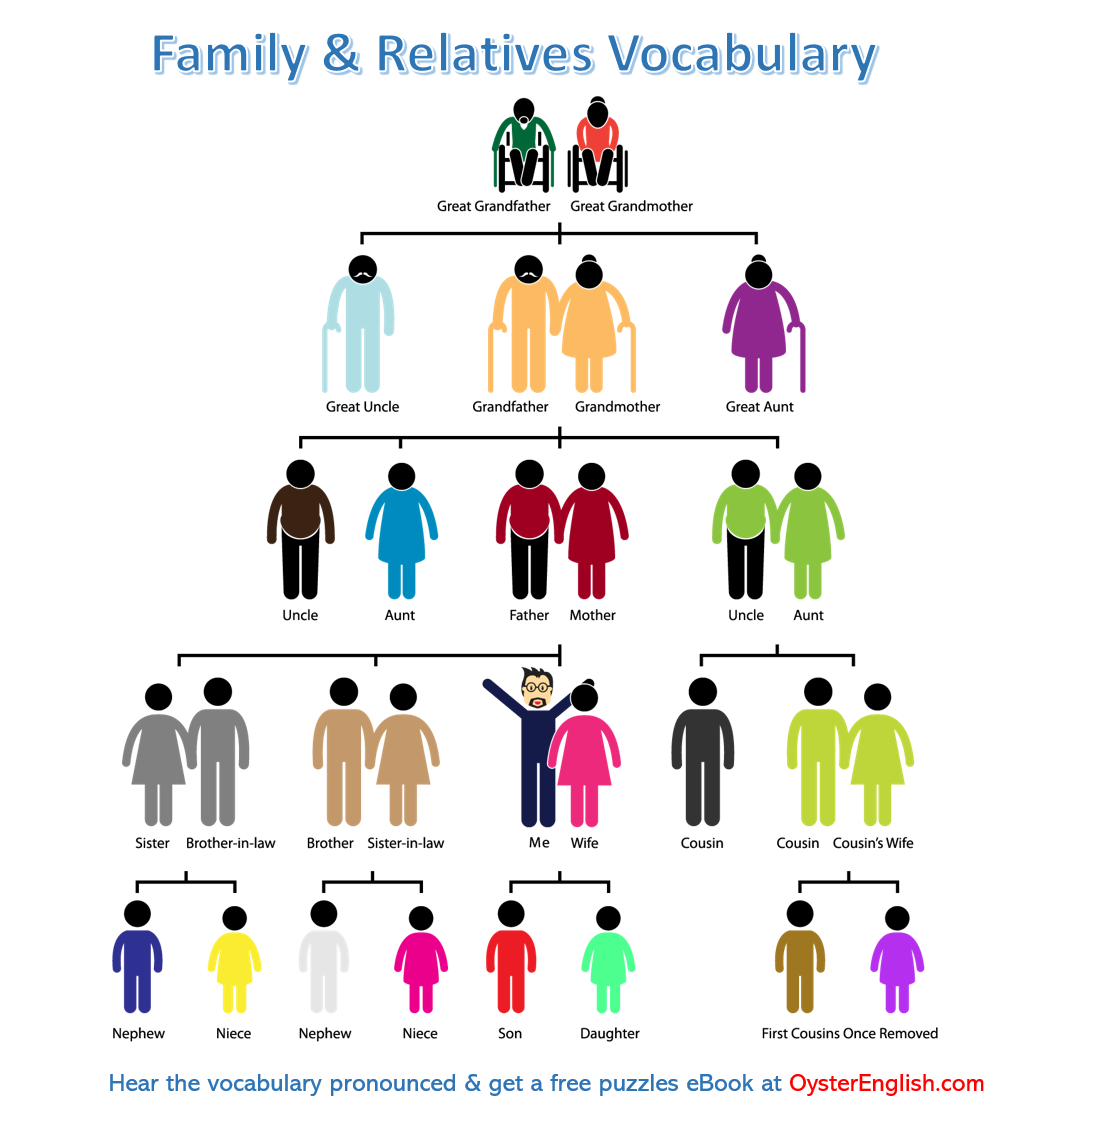 A family tree depicting the vocabulary on this page.